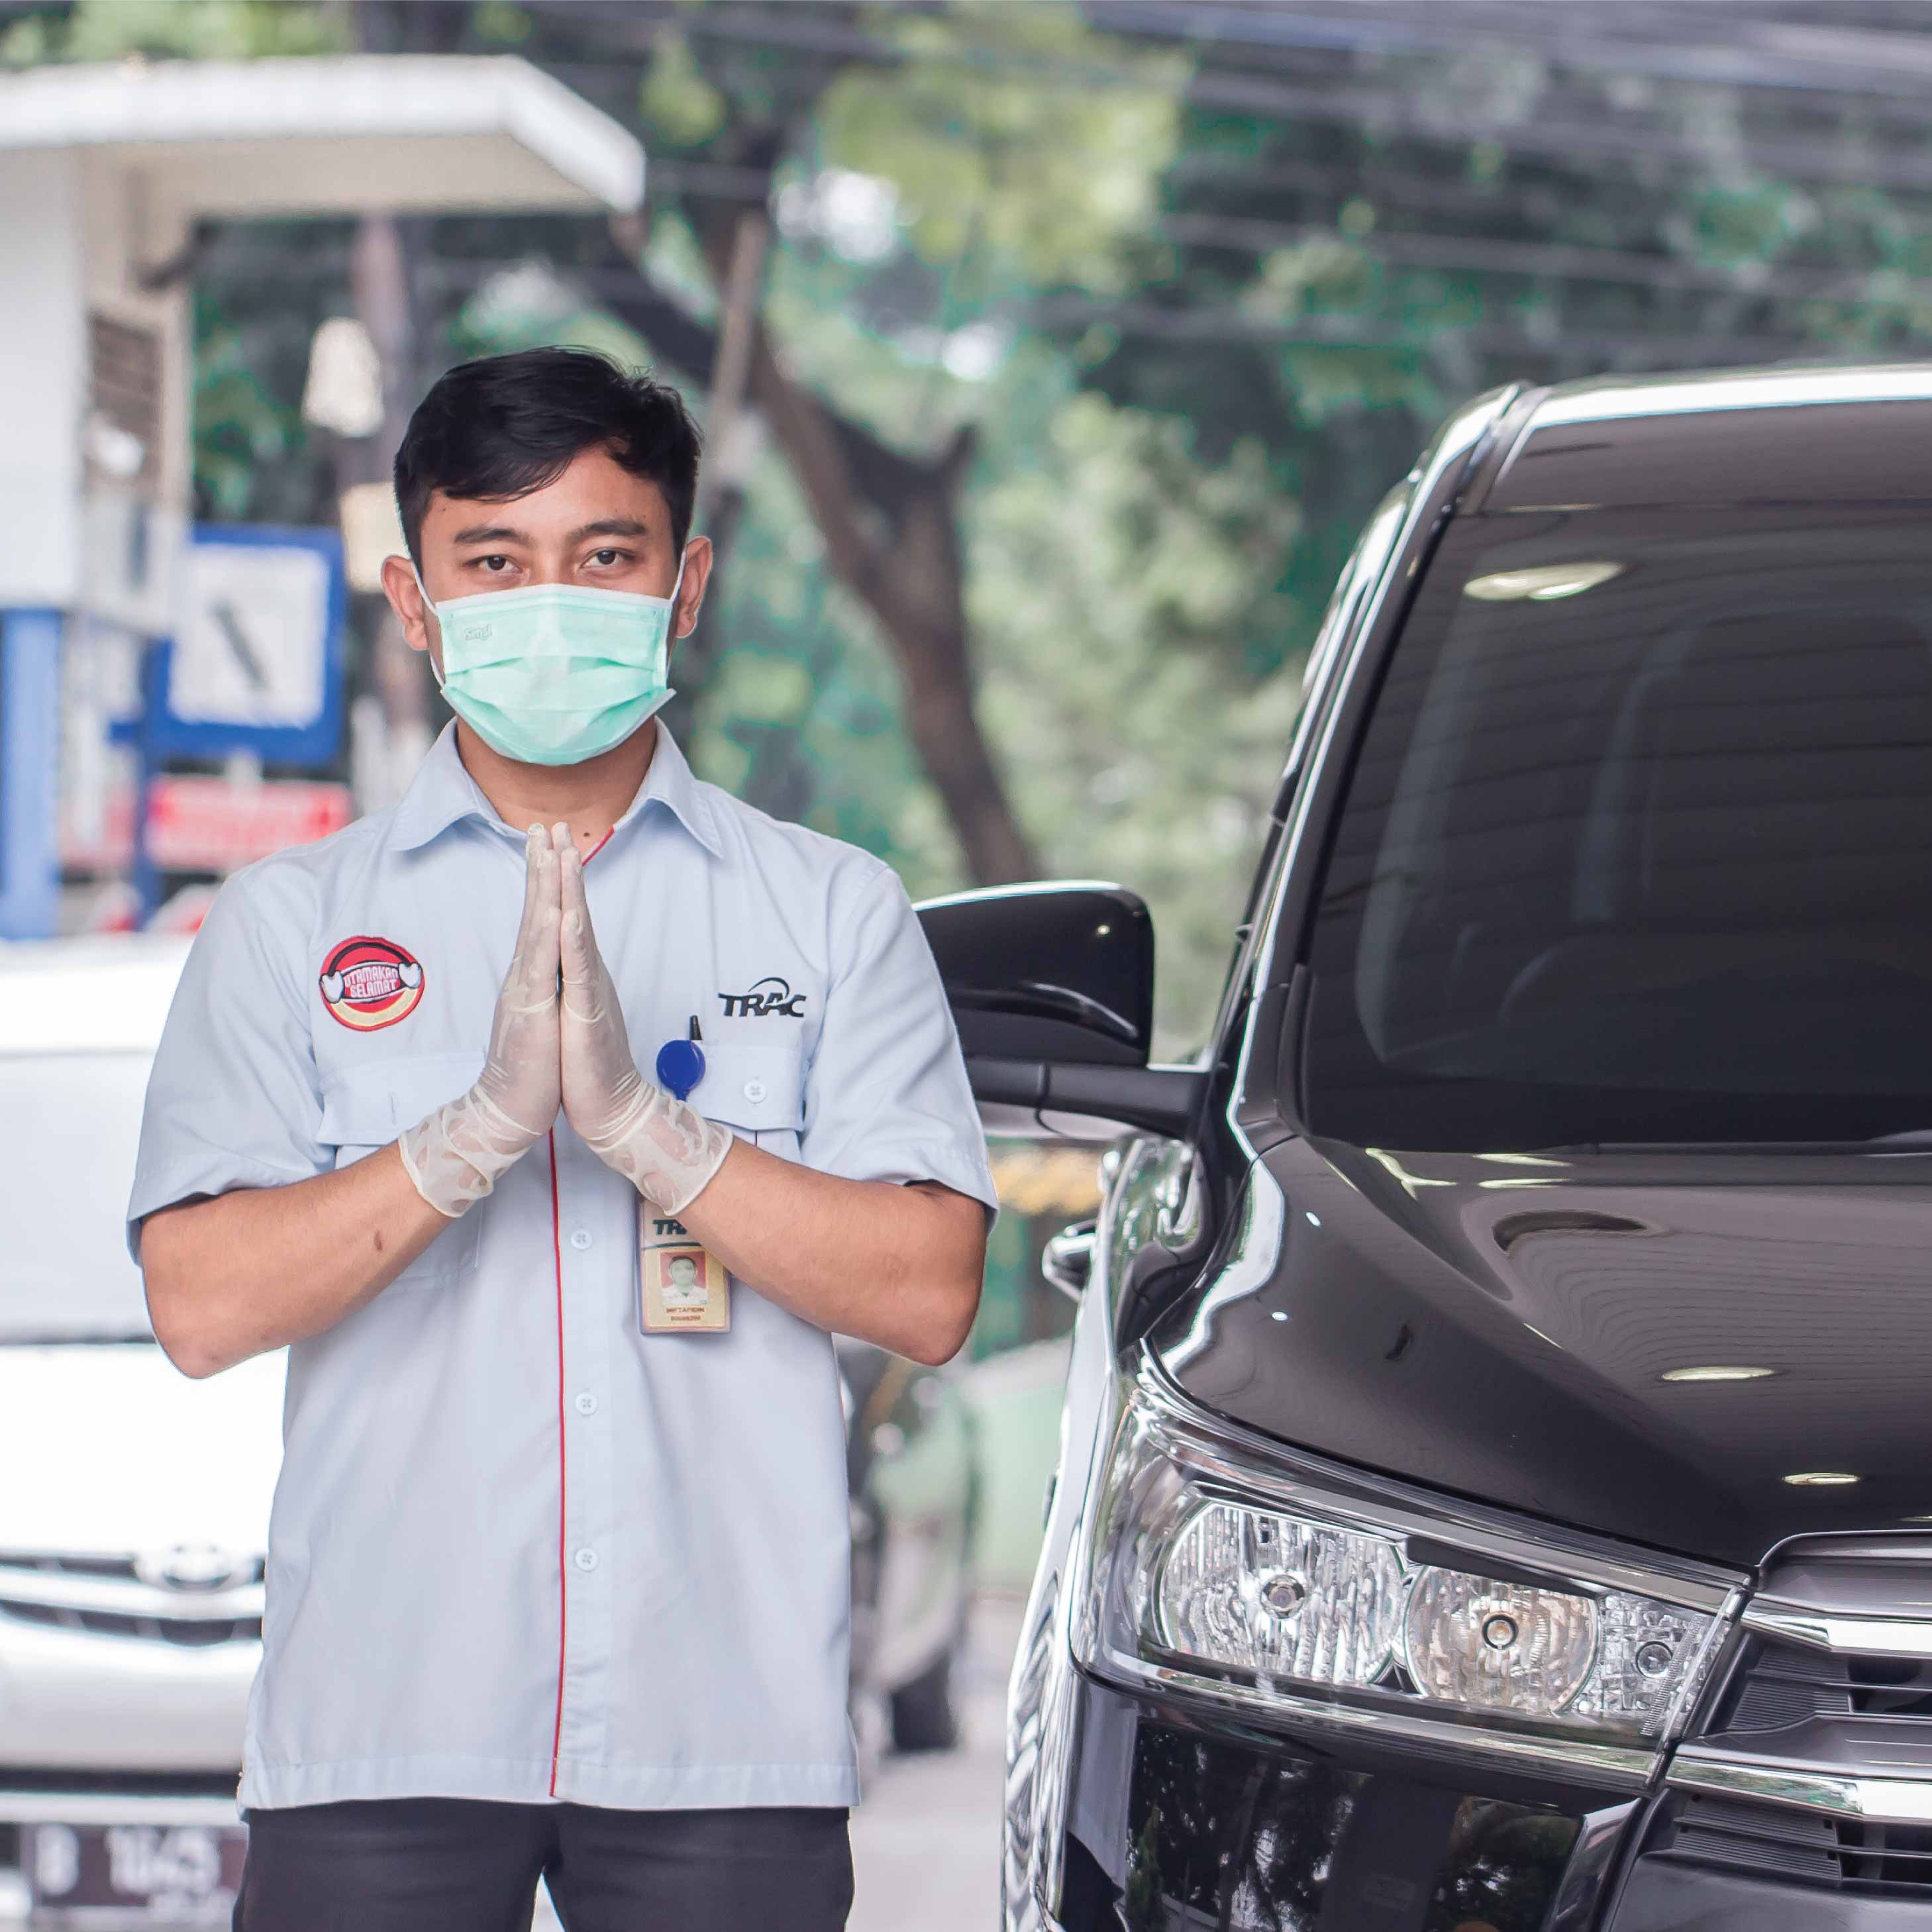 The Always-Maintained TRAC’s Fleet Safety and Cleanliness Standards Amid the COVID-19 Pandemic